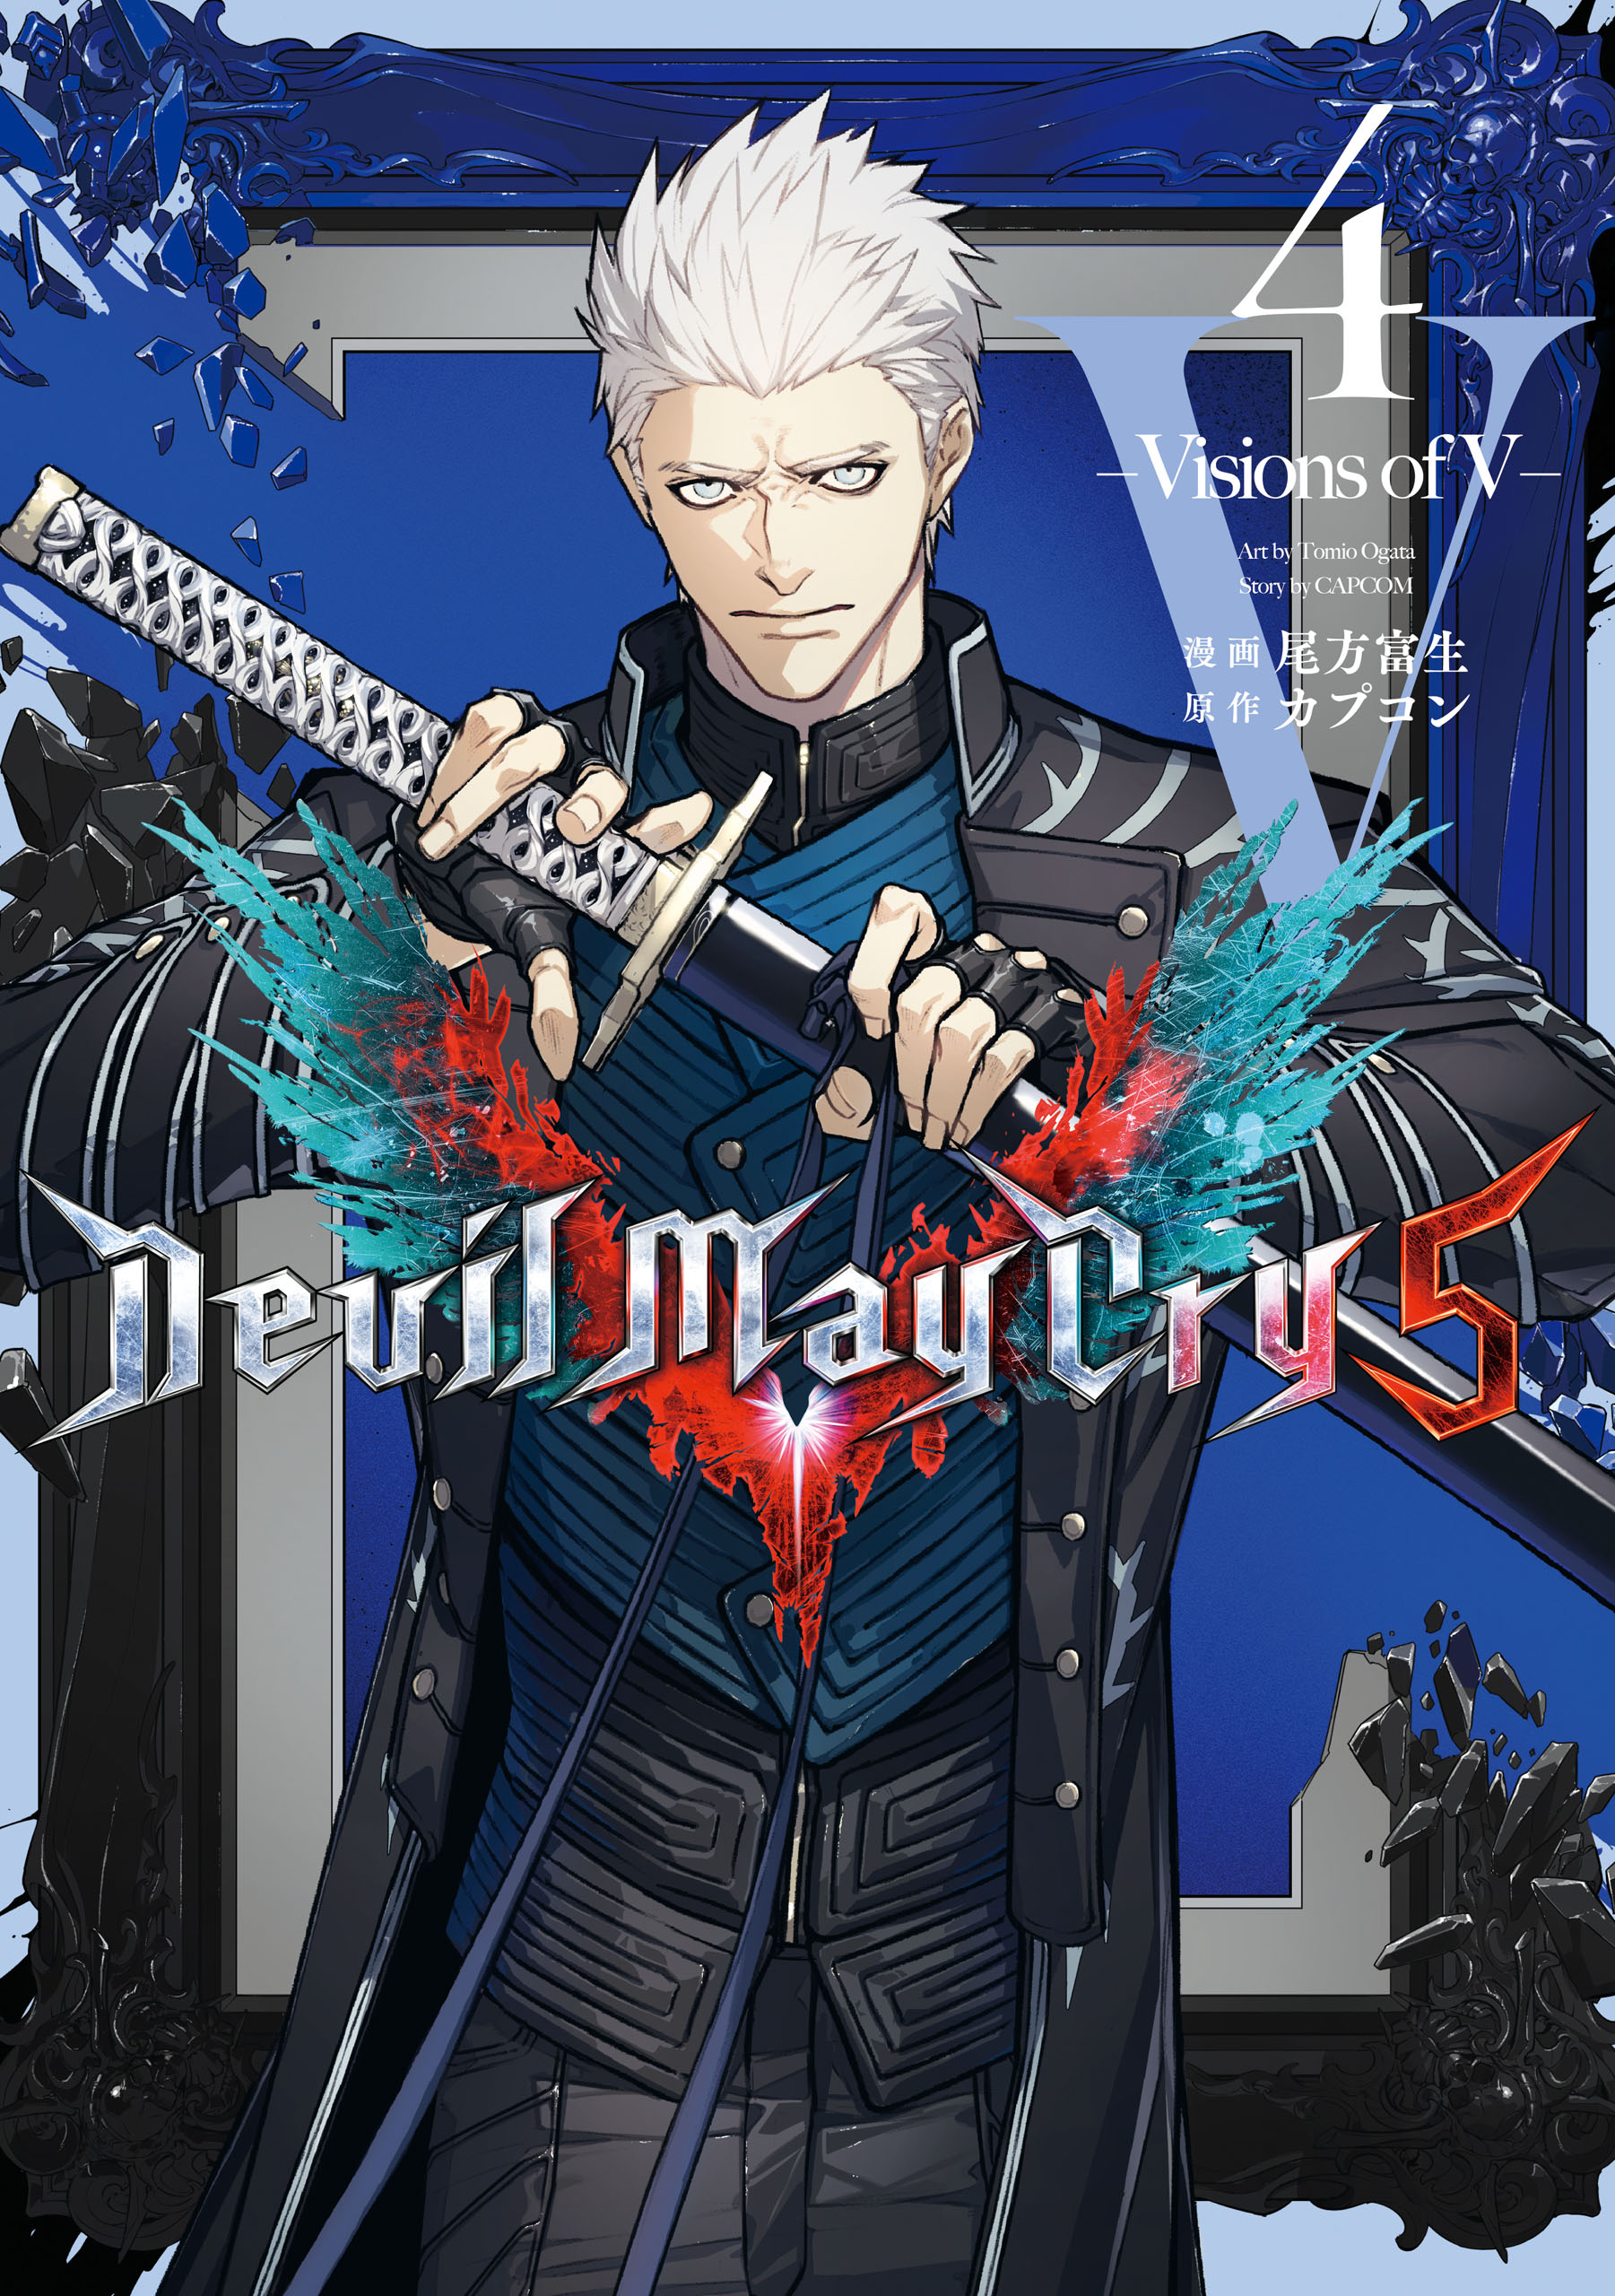 Devil May Cry 5 – Visions of V – 4巻 - 尾方富生/カプコン - 青年 